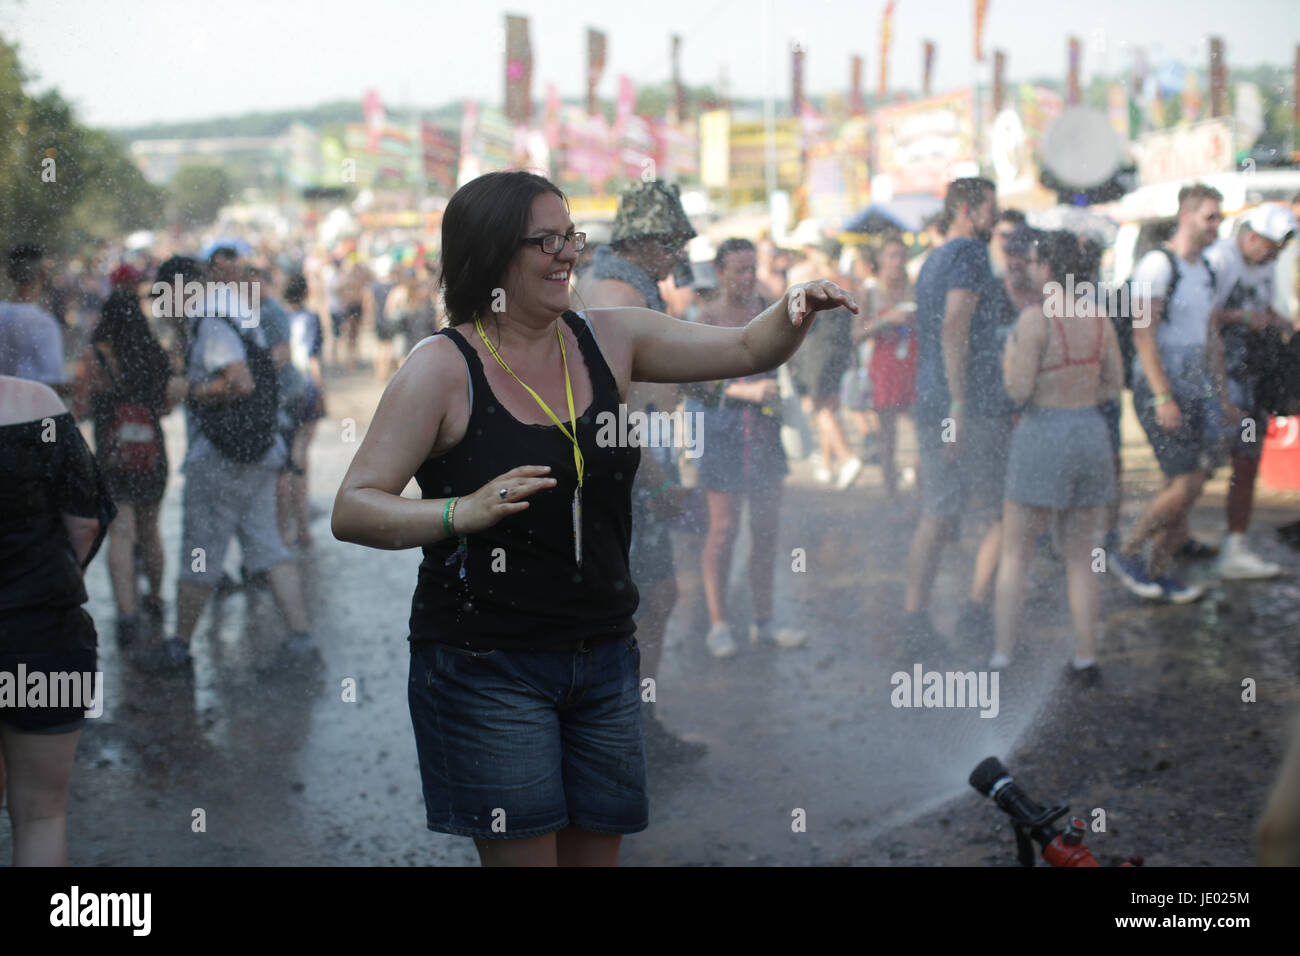 Somerset, UK. 21st June, 2017. A woman is doused by Shepton Mallet firemen on a very hot Day 1 (Wednesday) of the 2017 Glastonbury Festival at Worthy Farm in Somerset. Photo date: Wednesday, June 21, 2017. Credit: Roger Garfield/Alamy Live News Stock Photo